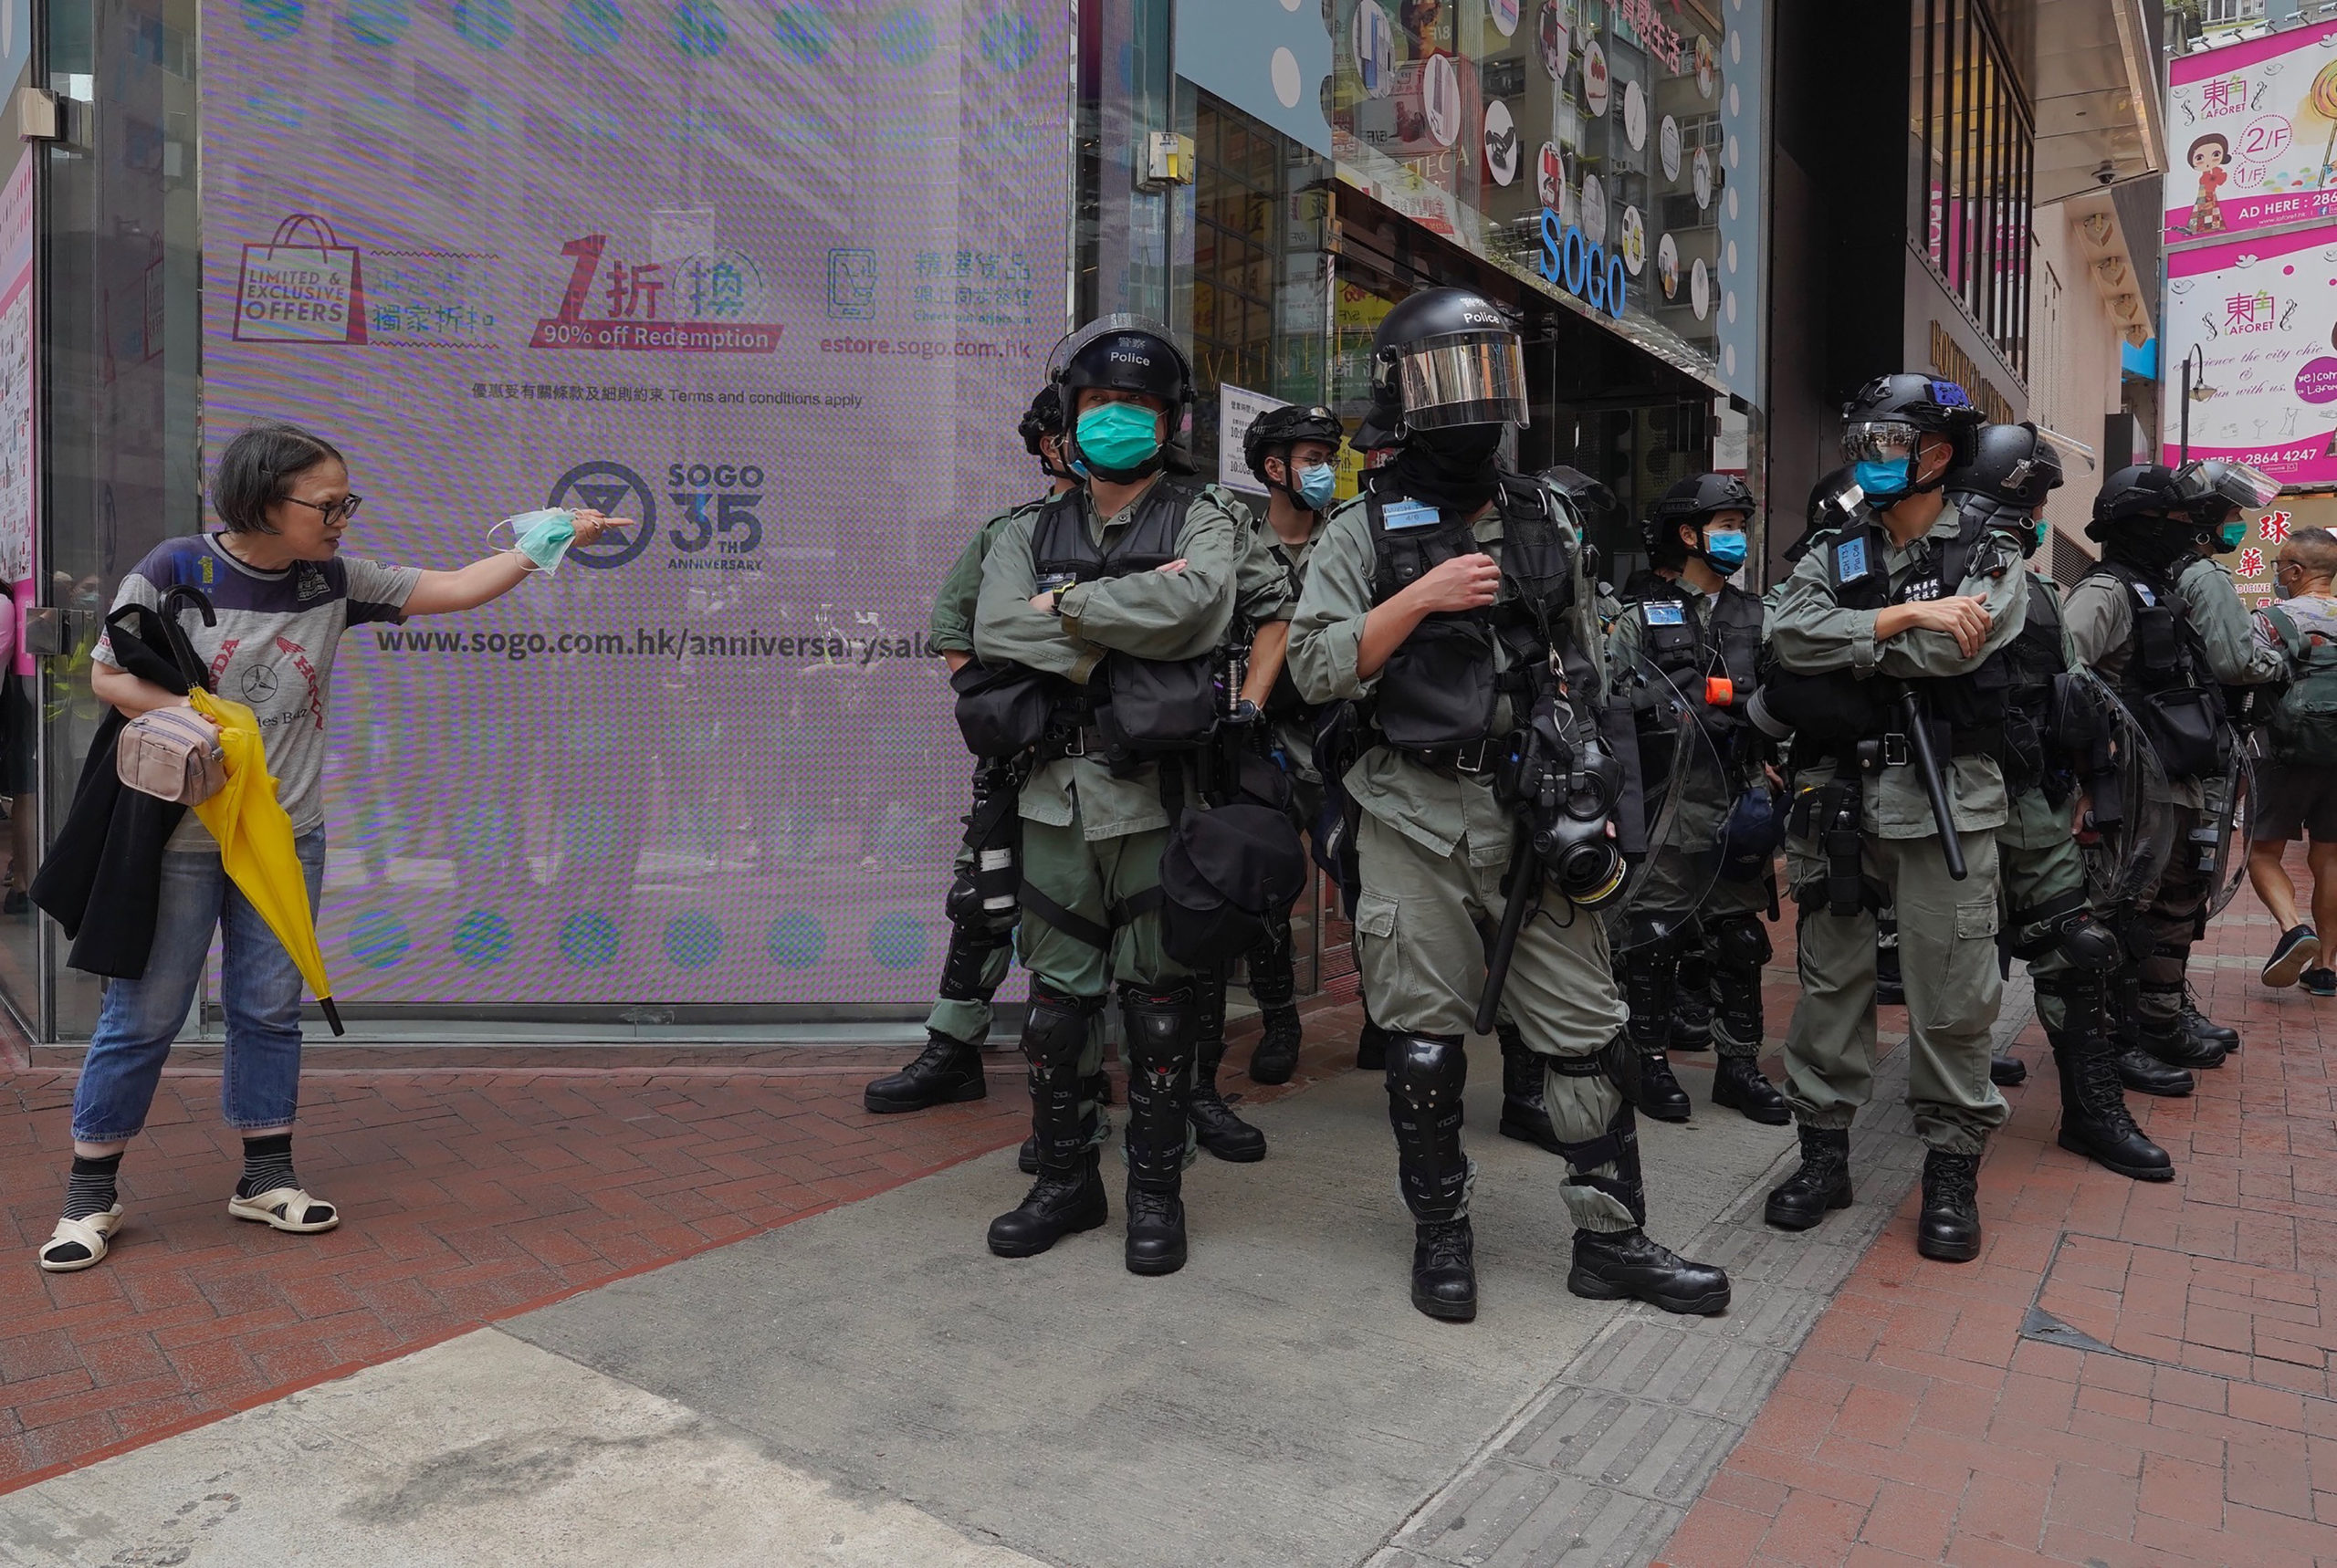 Riot police standing guard as a woman tries to cross the street in the Central district of Hong Kong.